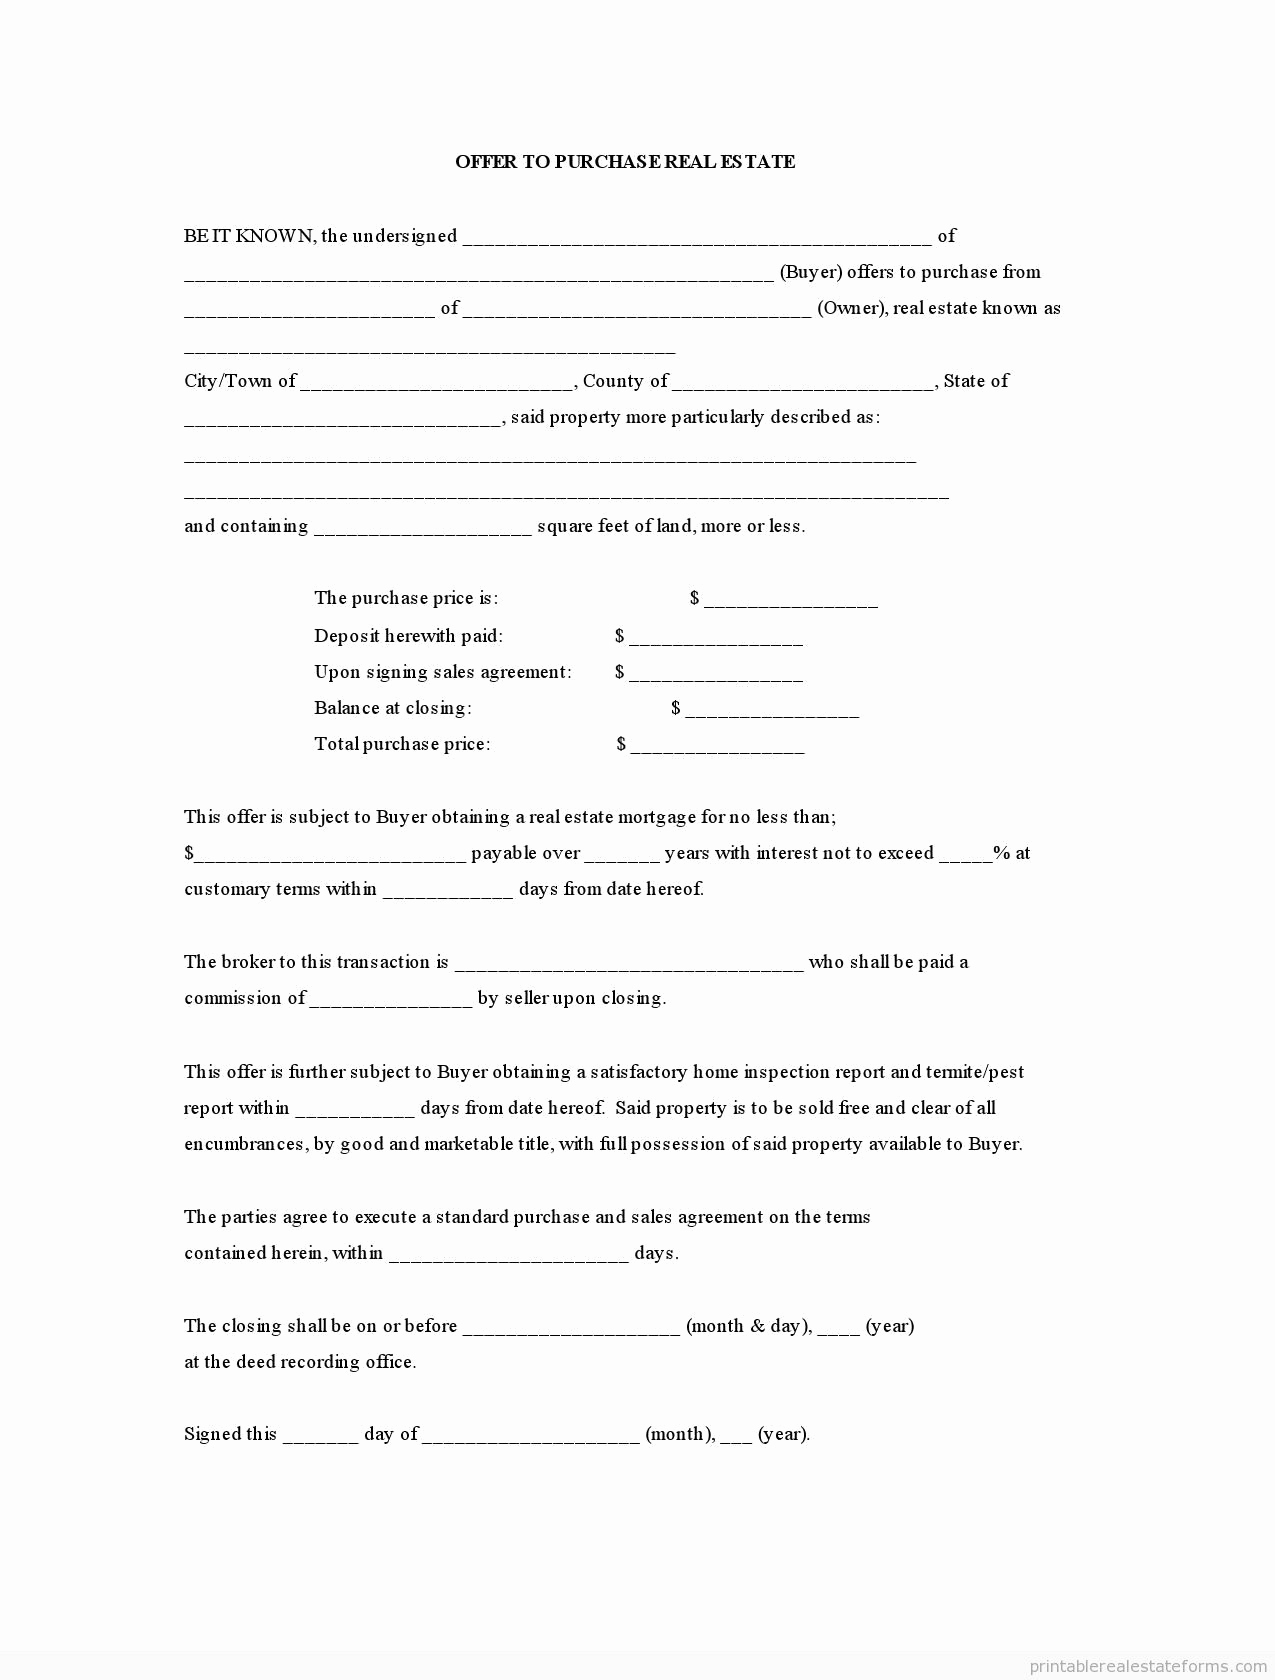 Real Estate Offer form Unique Free Printable Fer to Purchase Real Estate form Pdf